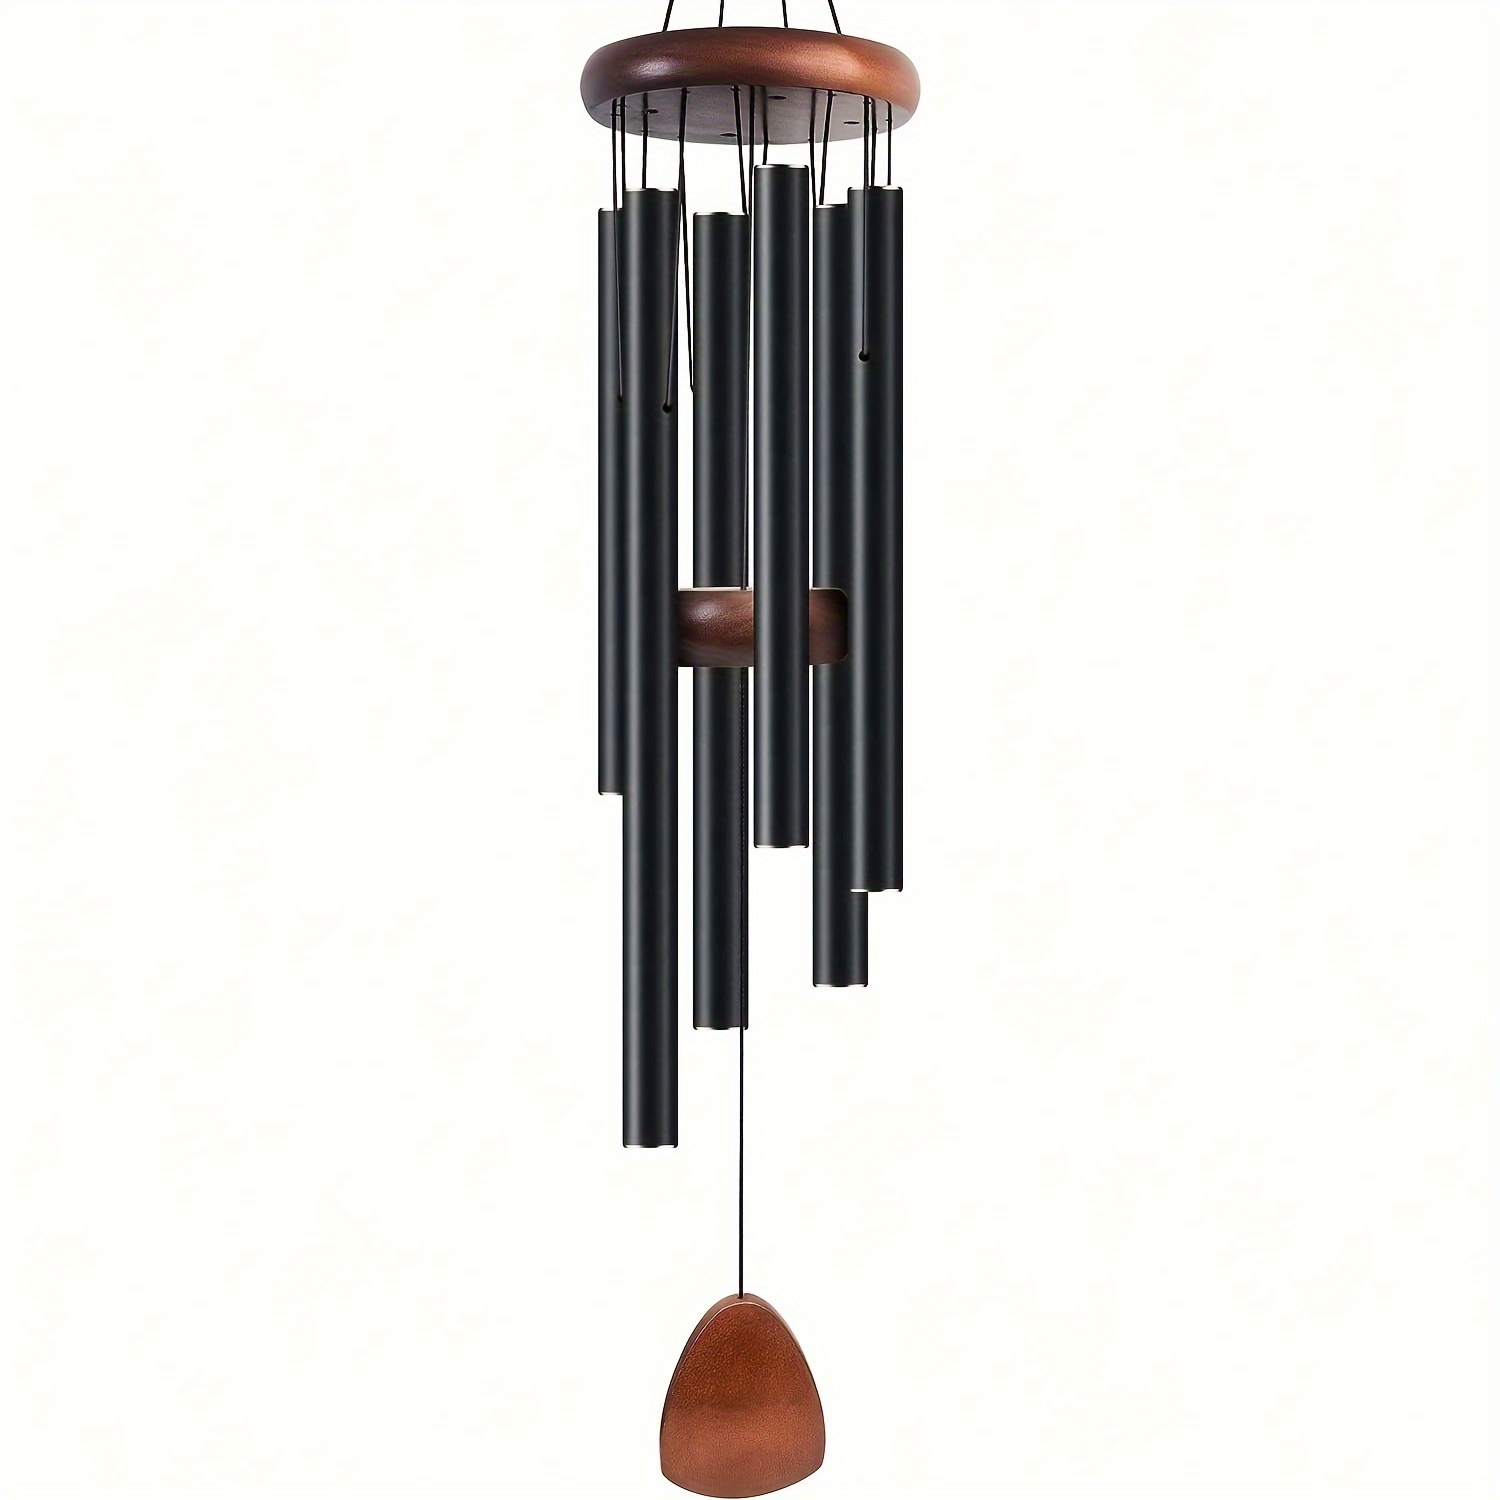 

1pc 26-inch Deep Tone Wind Chimes, Black Aluminum Coated Soothing Memorial Wind Chimes, Outdoor Sympathy Chime Gift For Mom, Women, Grandma, Neighbors, Durable Pine Wood